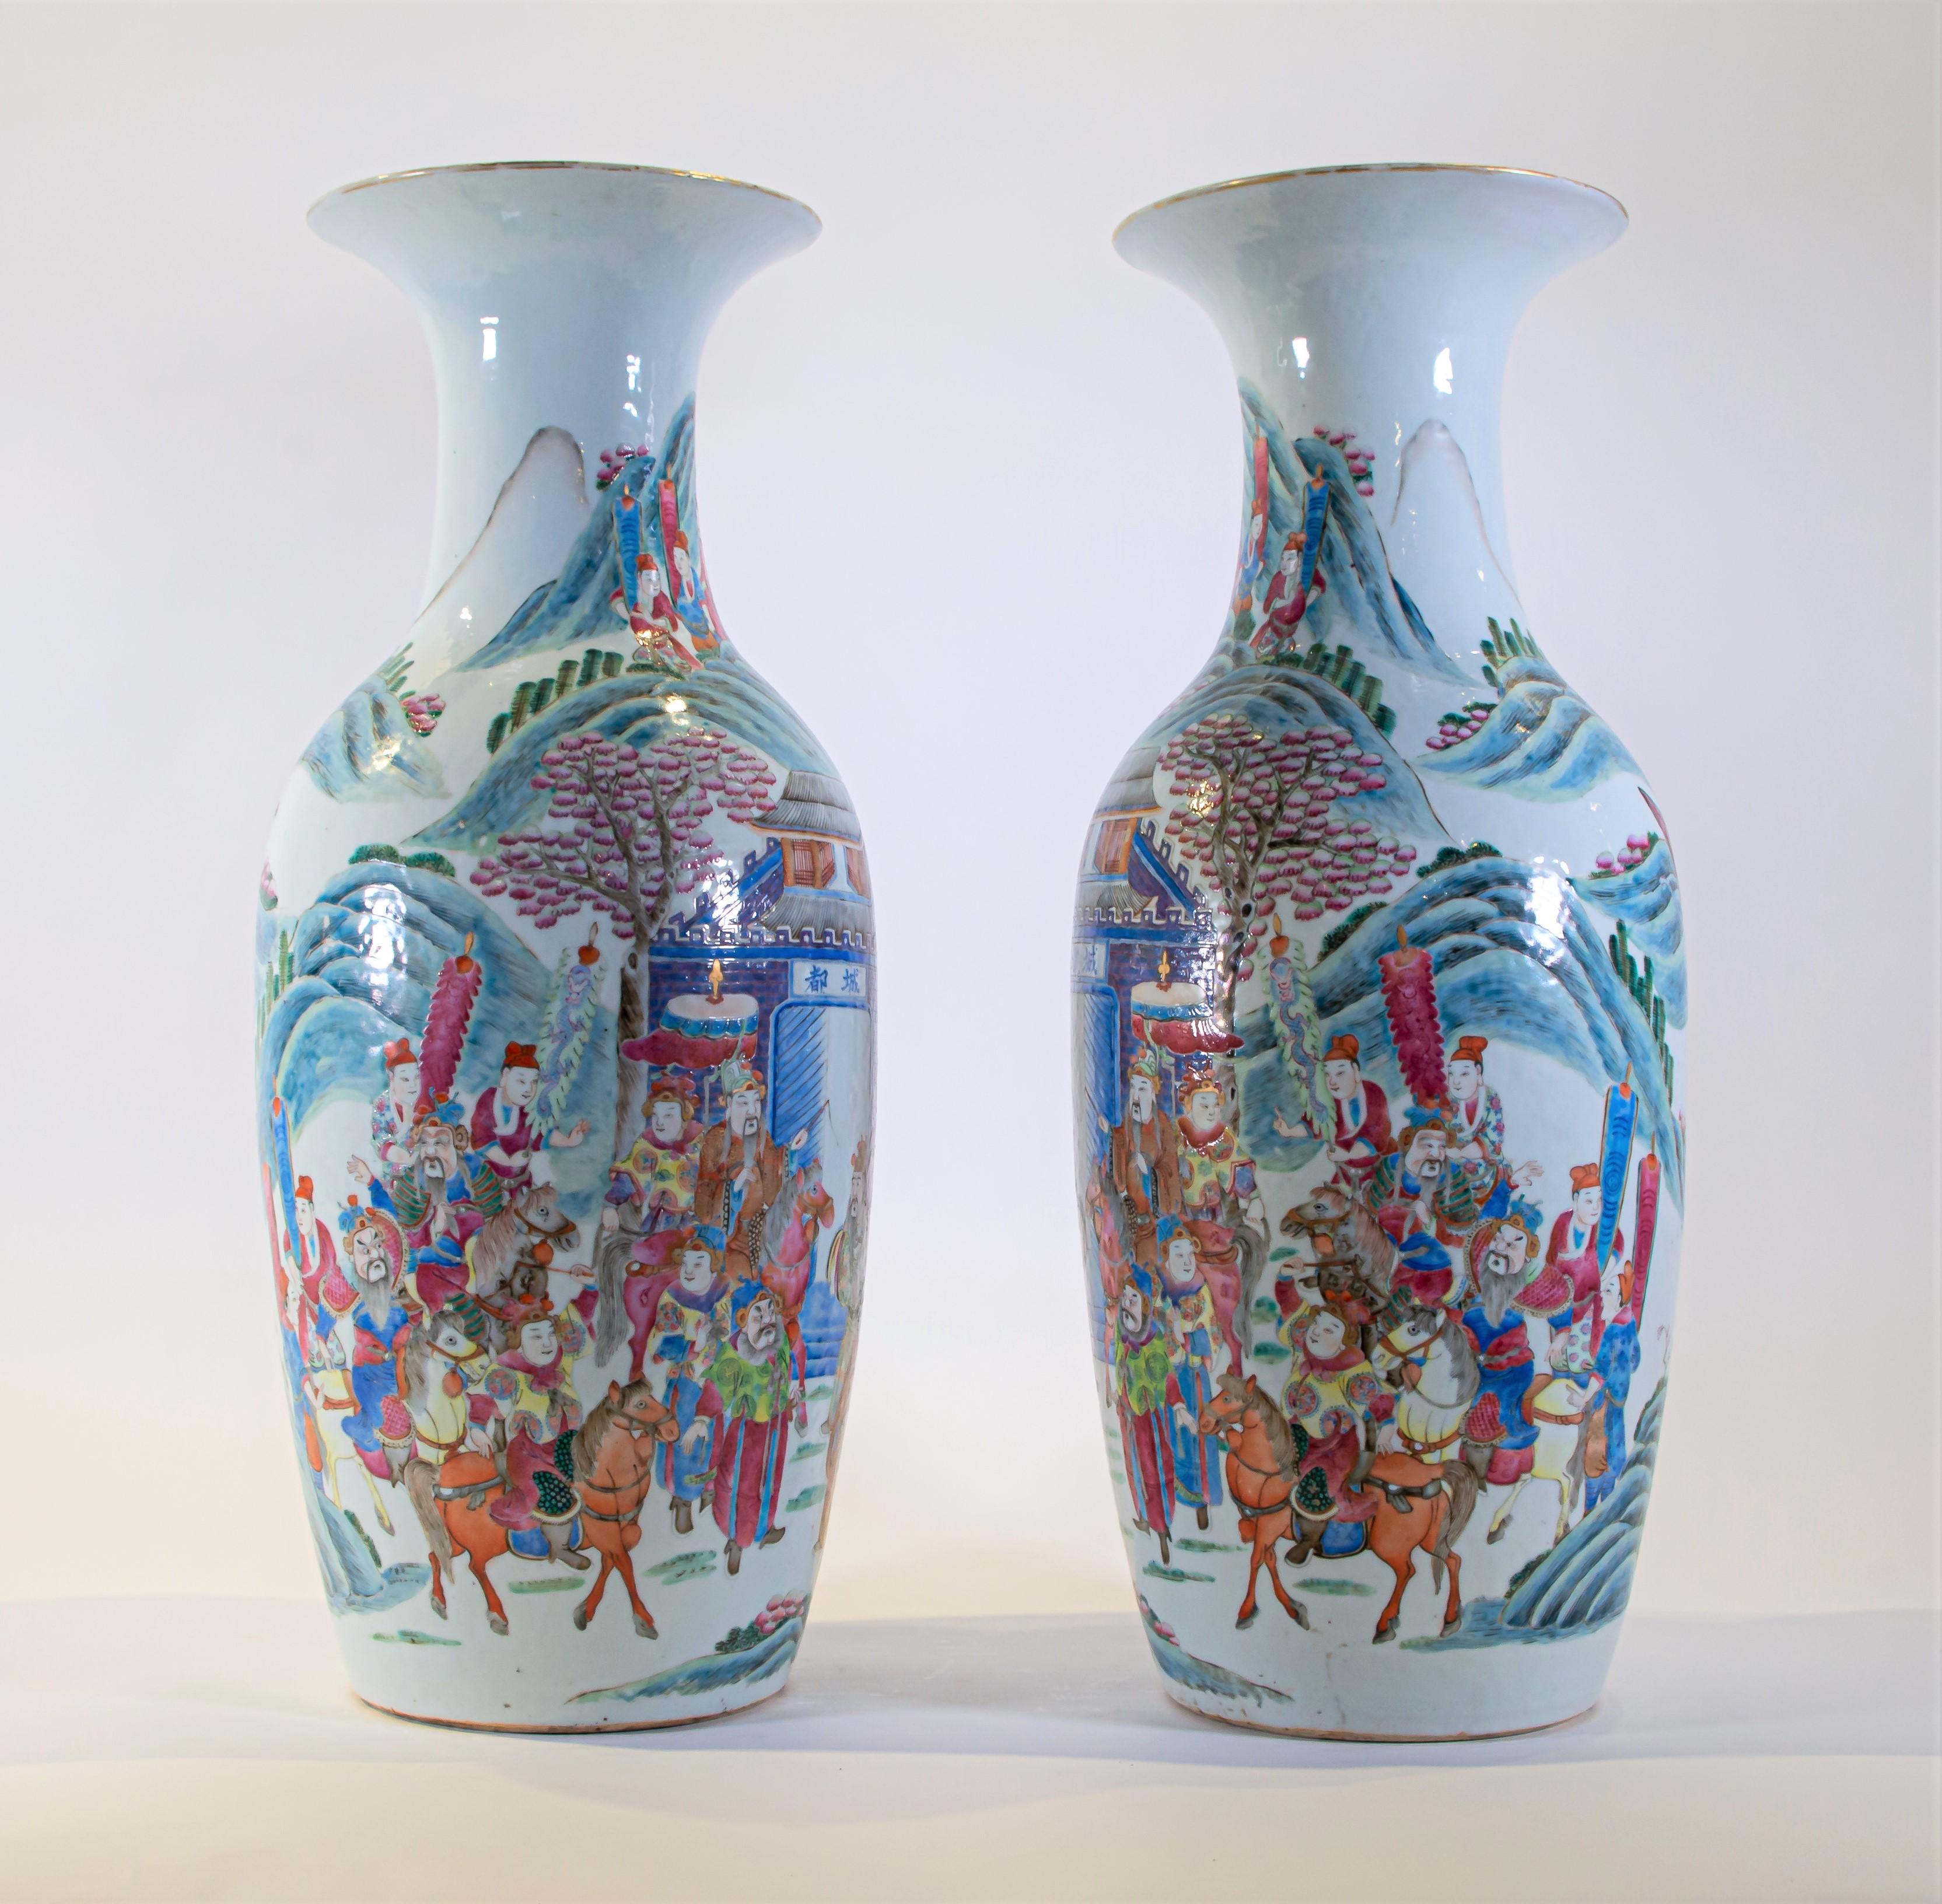 An exceptional and large pair of hand painted antique Chinese Famille rose Emperor scene vases. Of baluster form these vases are both large and beautifully decorated in multicolored hues that include red, green, purple, brown, orange, yellow, blue,